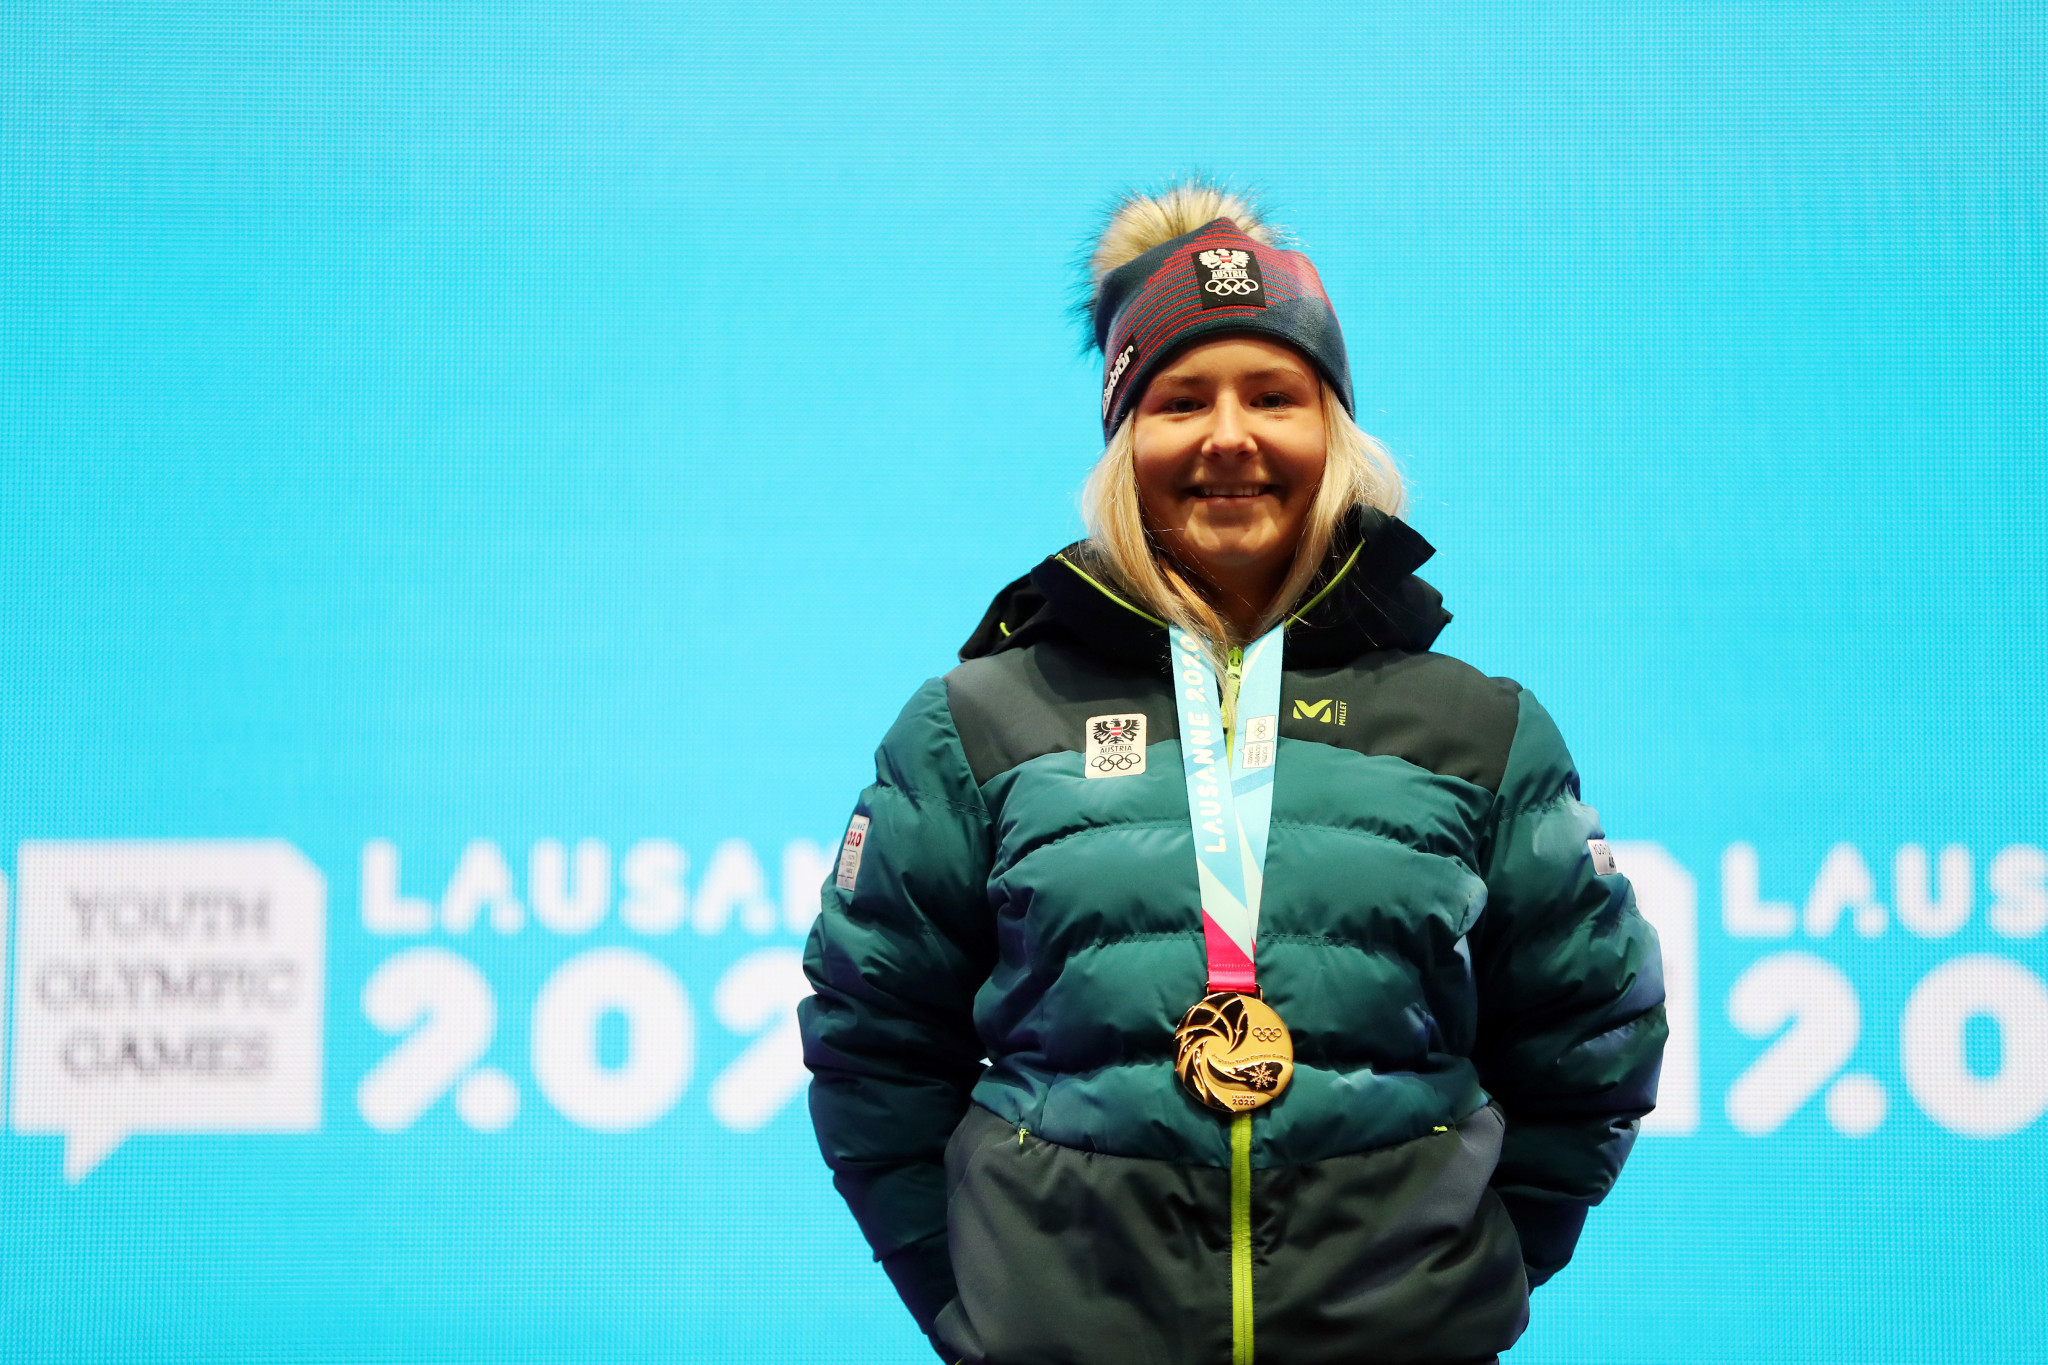 Amanda Salzgeber followed in the ski tracks of her famous parents by winning the women's event ©Getty Images